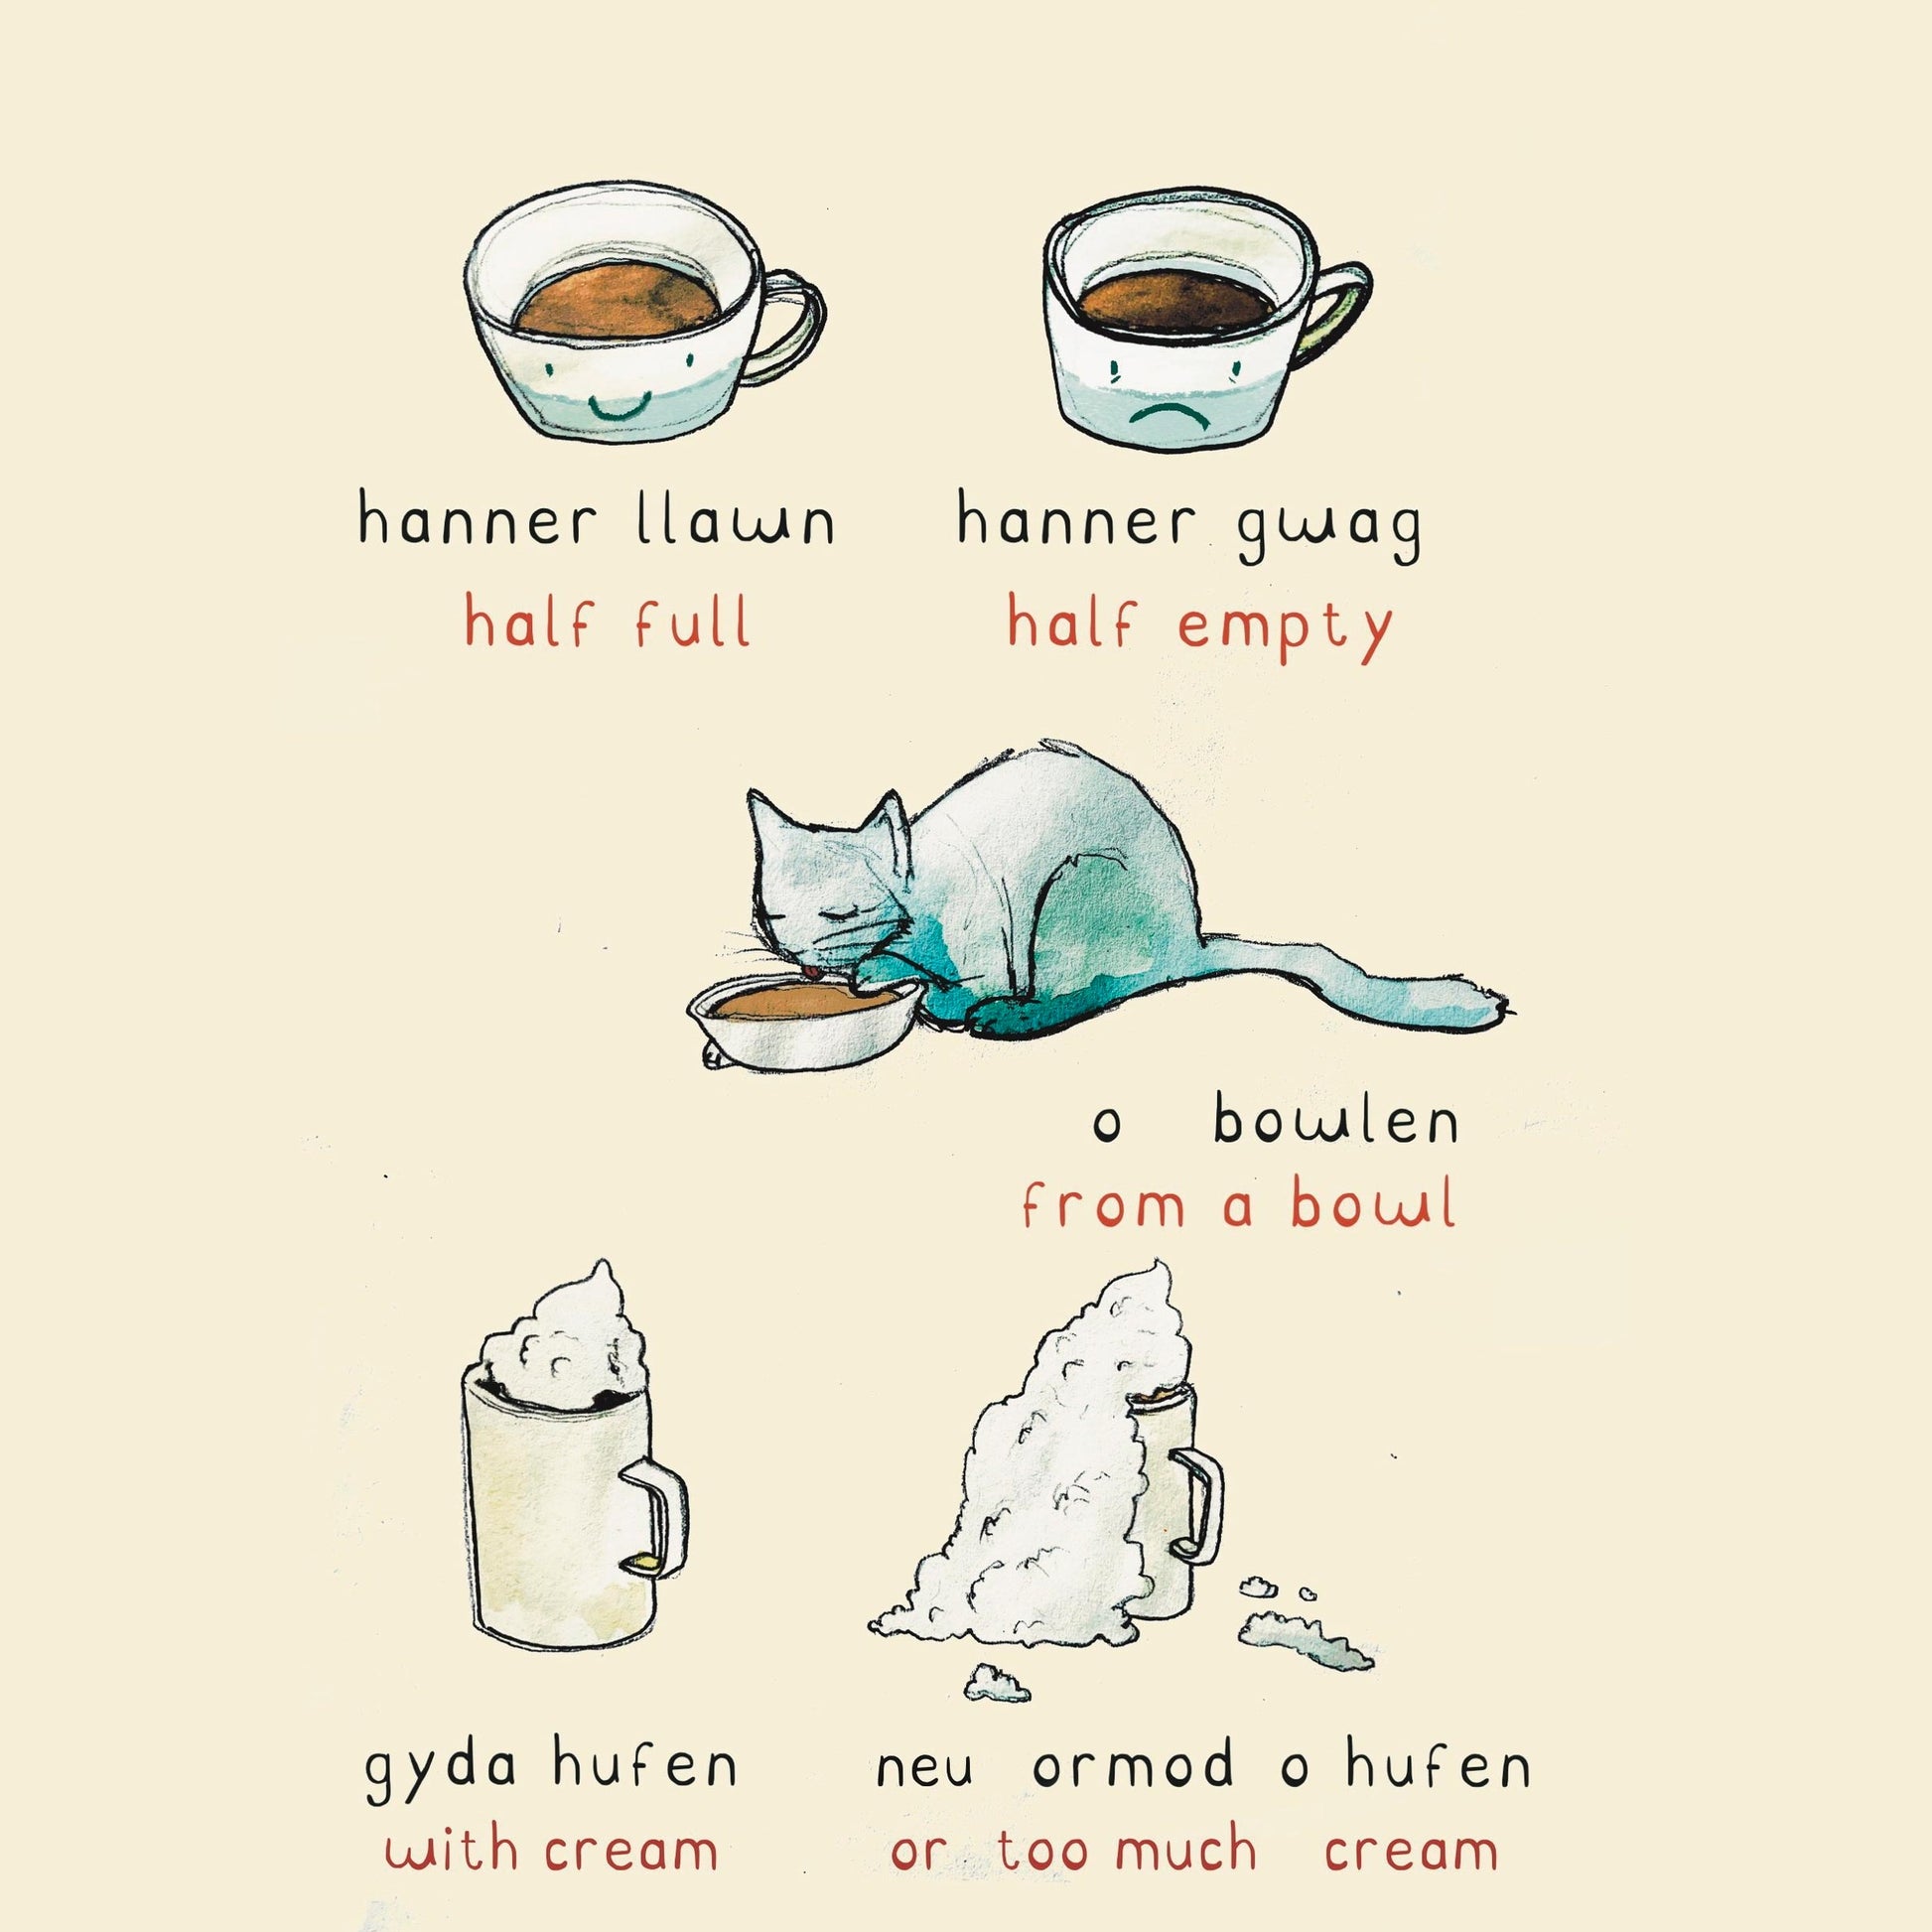 31 Ways to HOFFI COFFI: Learning Welsh with 31 strange coffee habits - SIGNED!